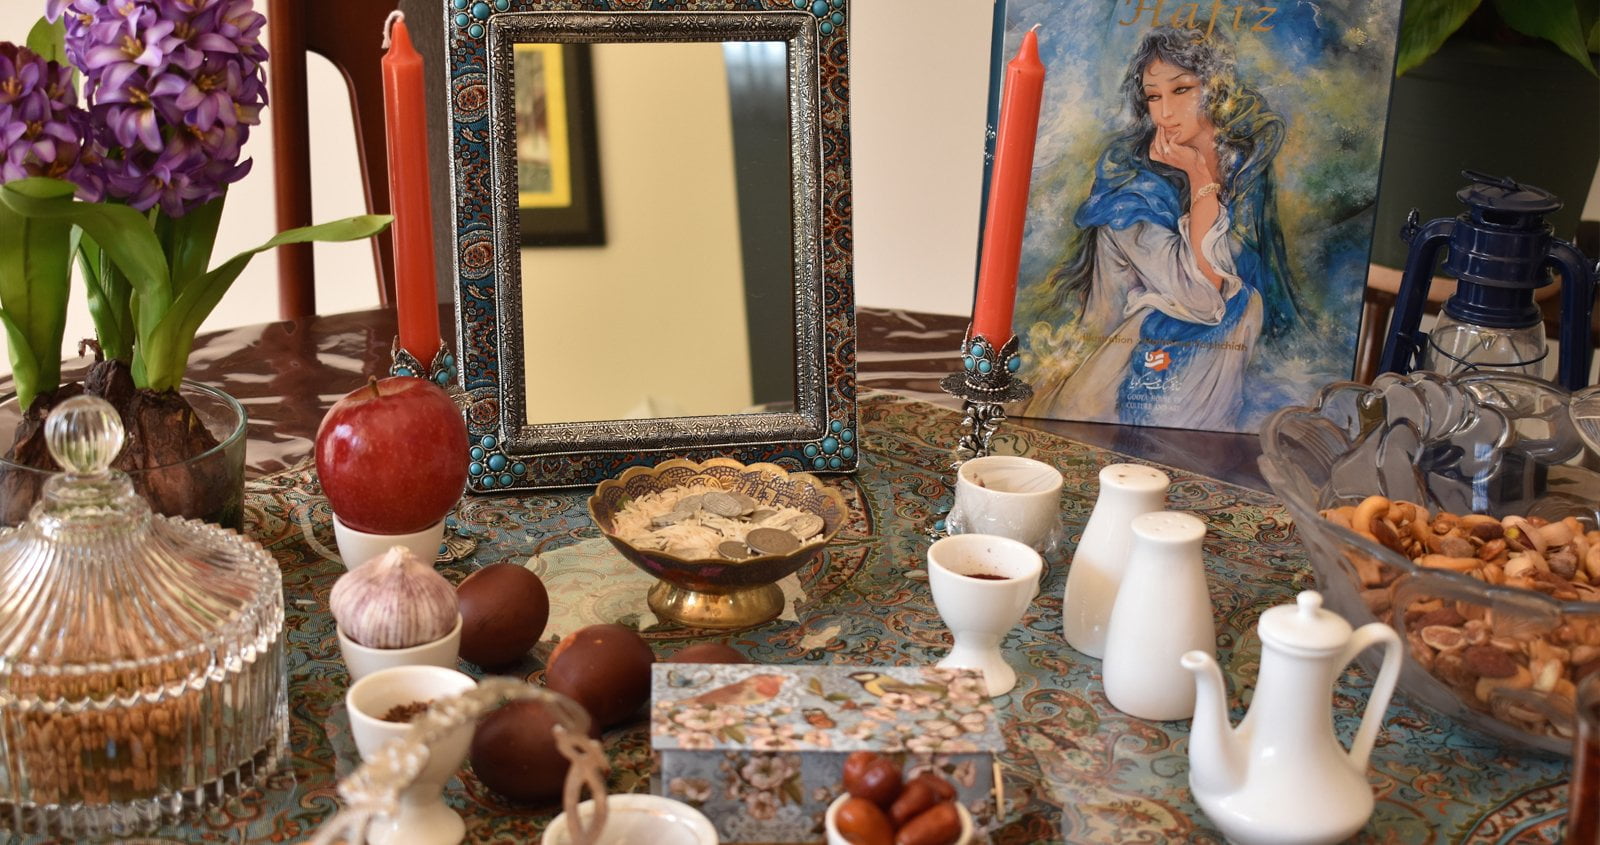 The table decorated with a mirror and small trinkets and dishes